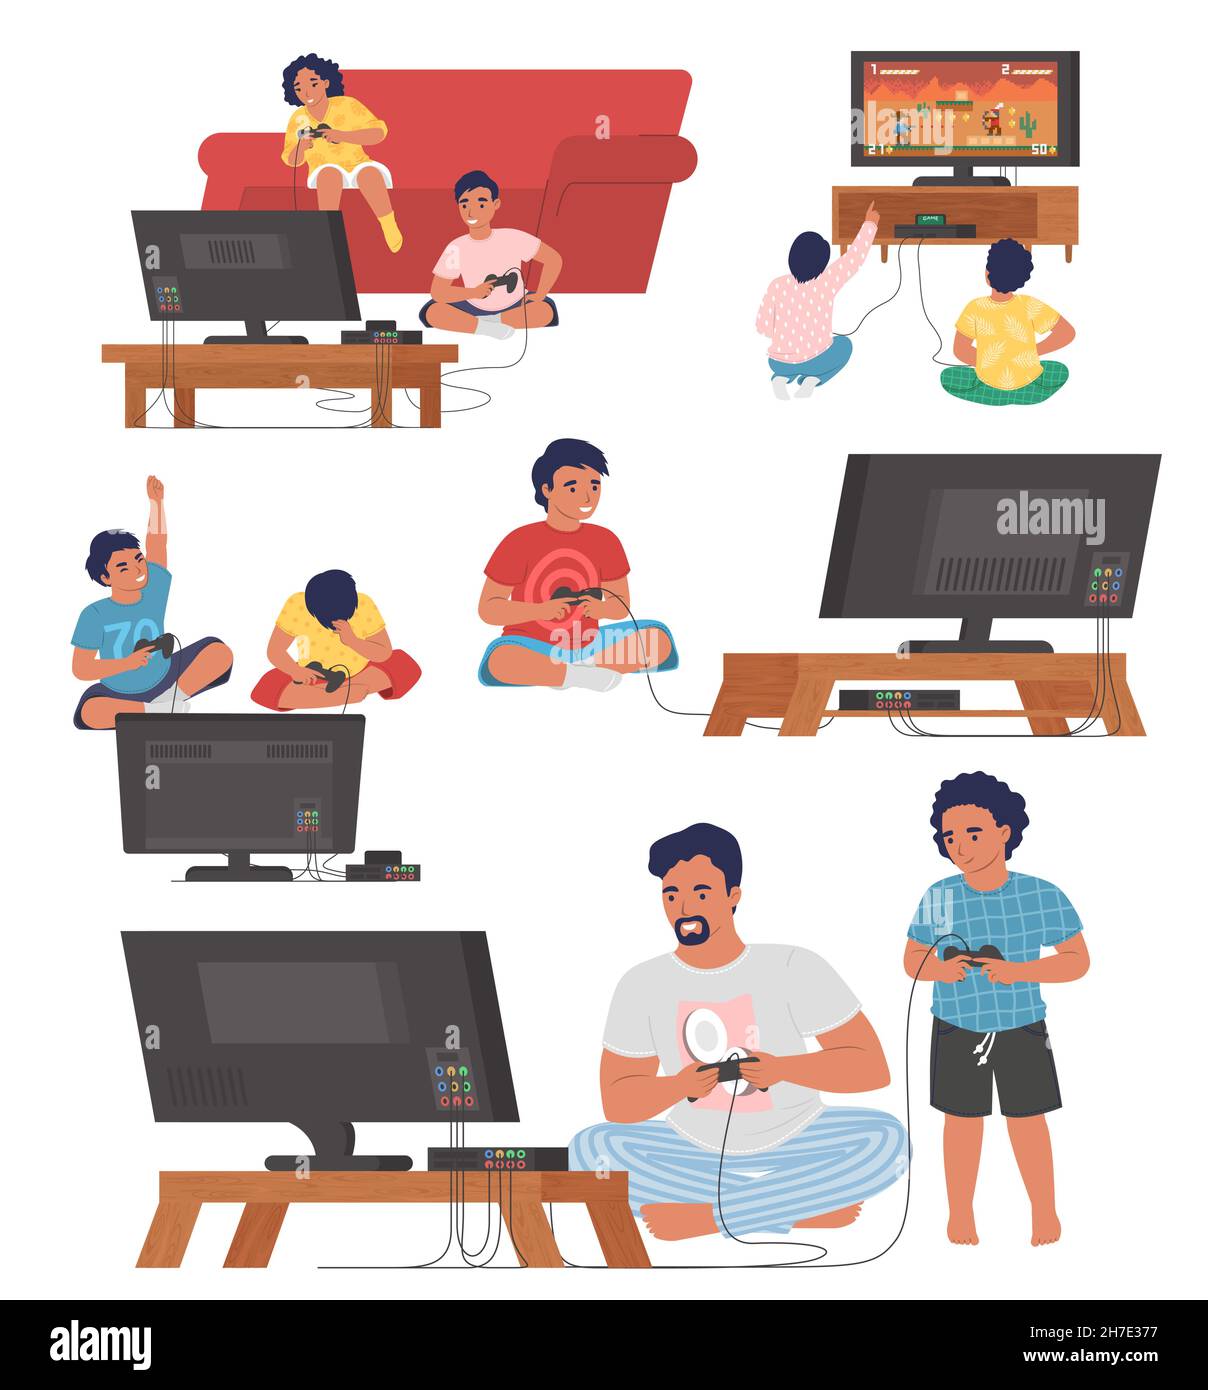 Gamers playing console video games on tv with controllers, vector illustration. Video gaming technologies. Leisure time. Stock Vector